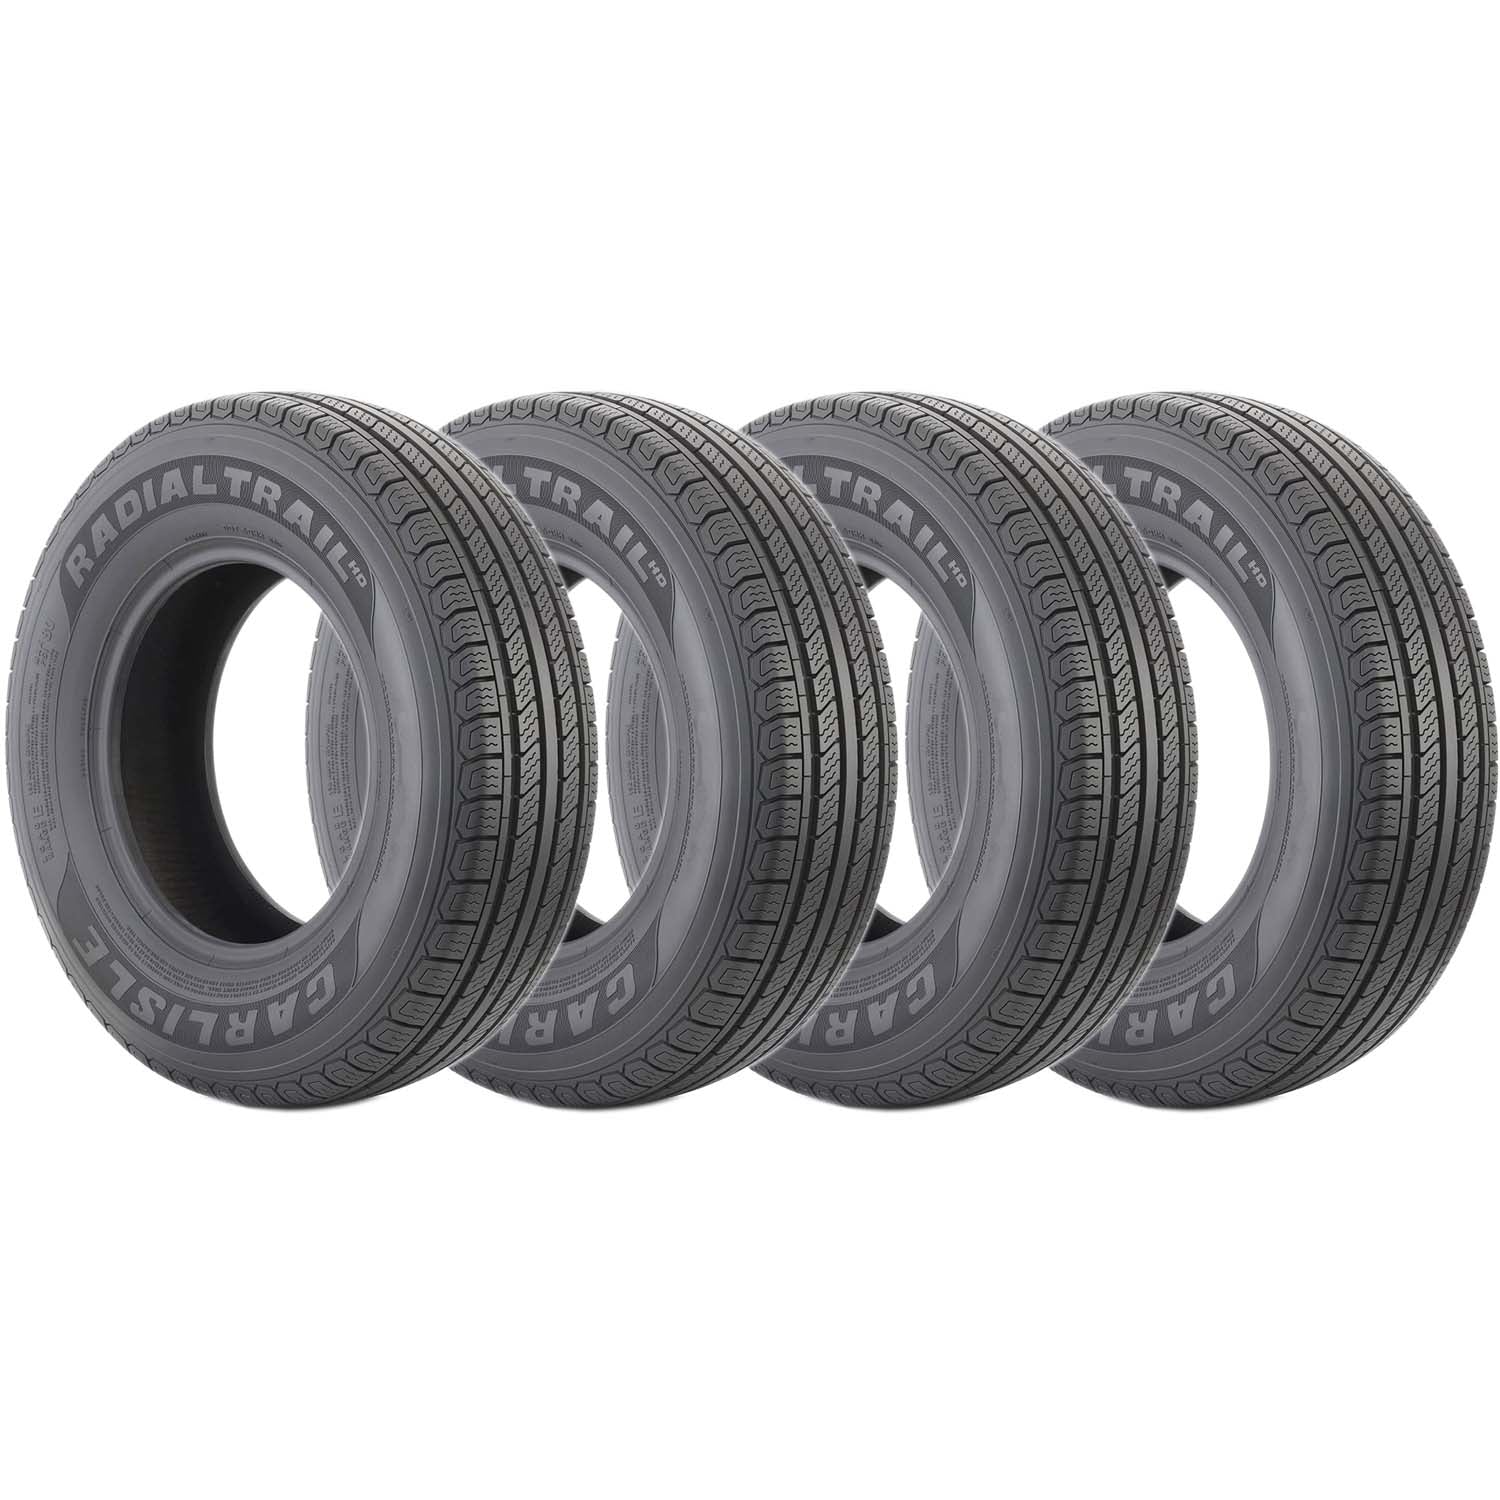 Carlisle Radial Trail HD Trailer Tire LRD 8ply ST185/80R13 Pack of 4